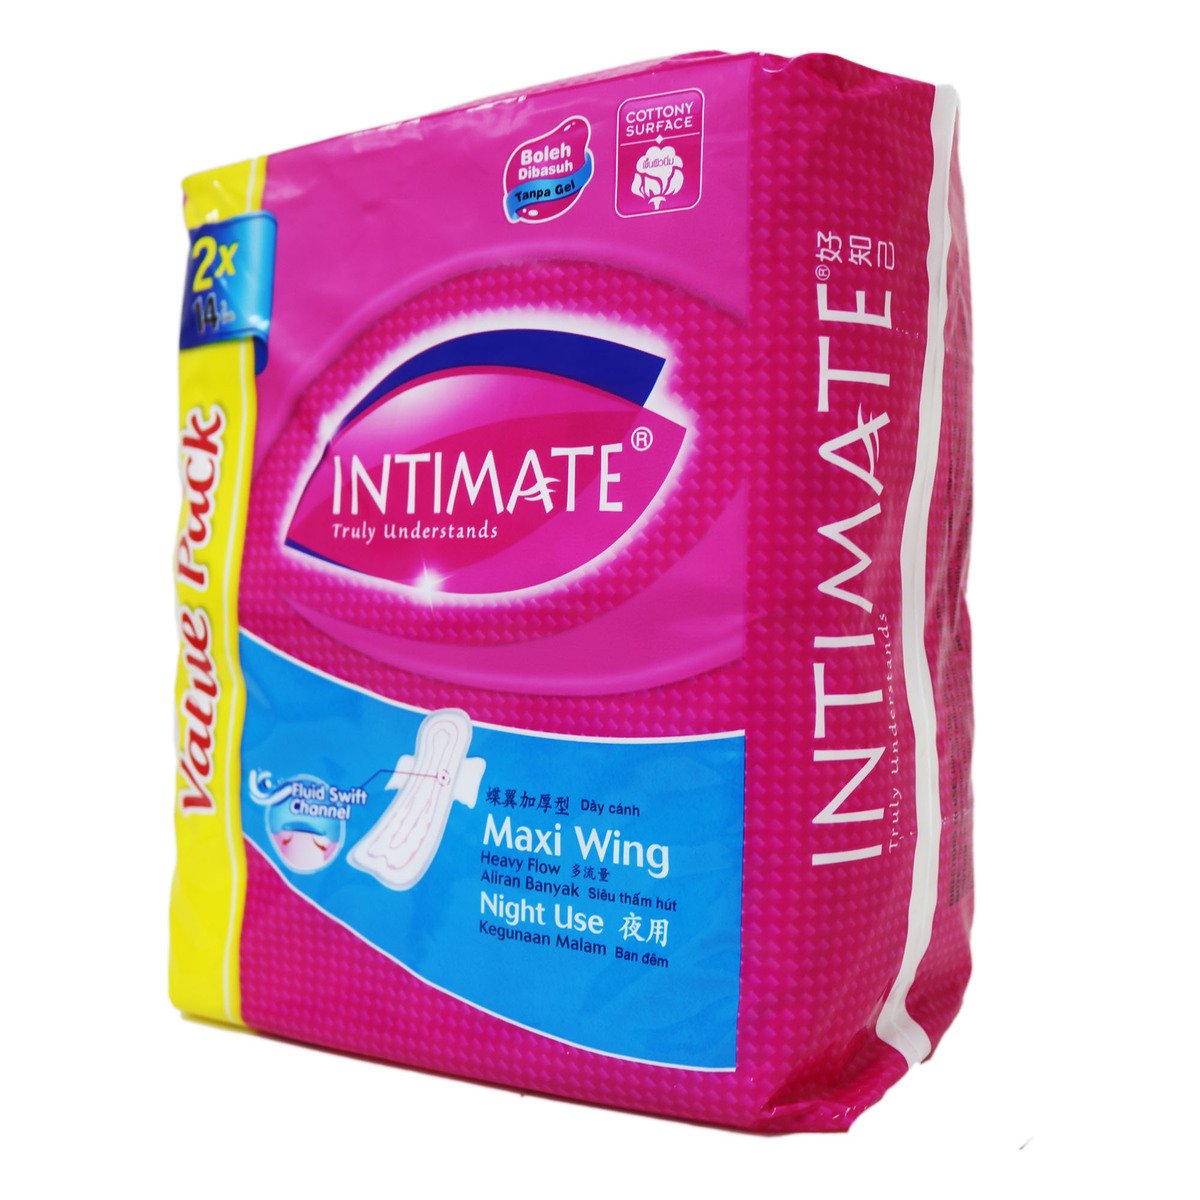 Intimate Night Long Maxi Wing 2 x 14 Counts